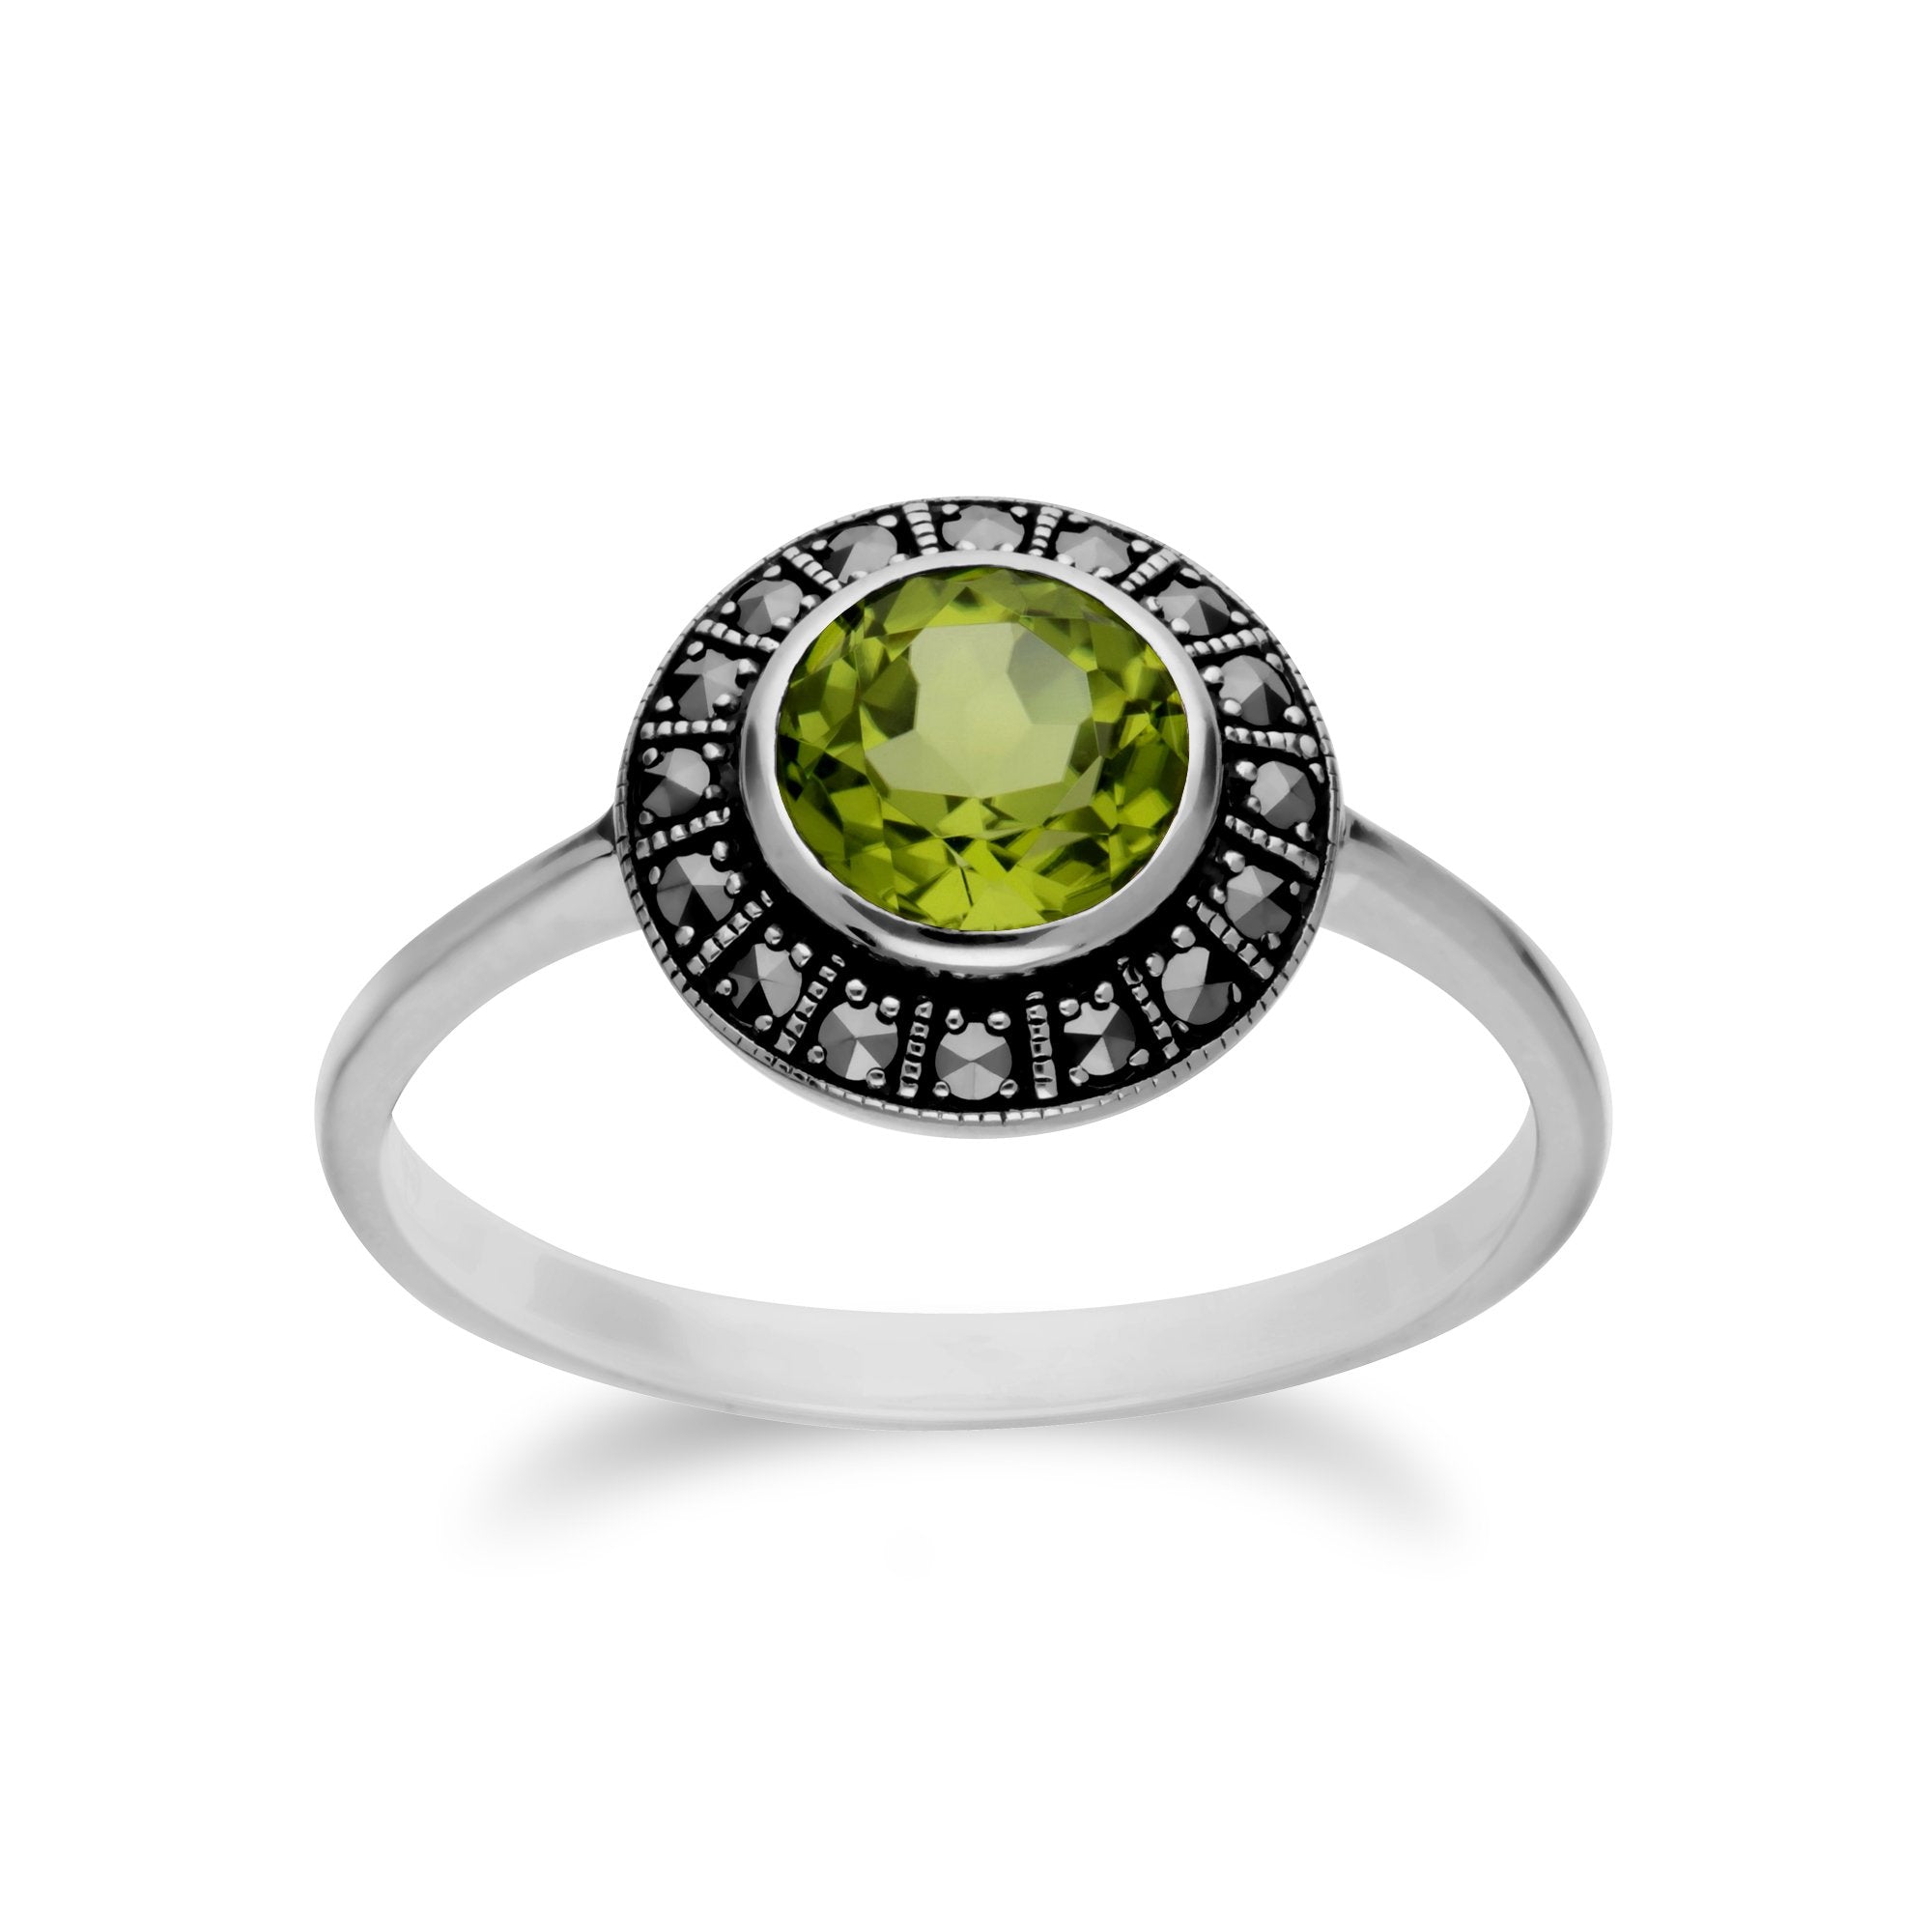 Art Deco Style Round Peridot & Marcasite Halo Ring in 925 Sterling Silver